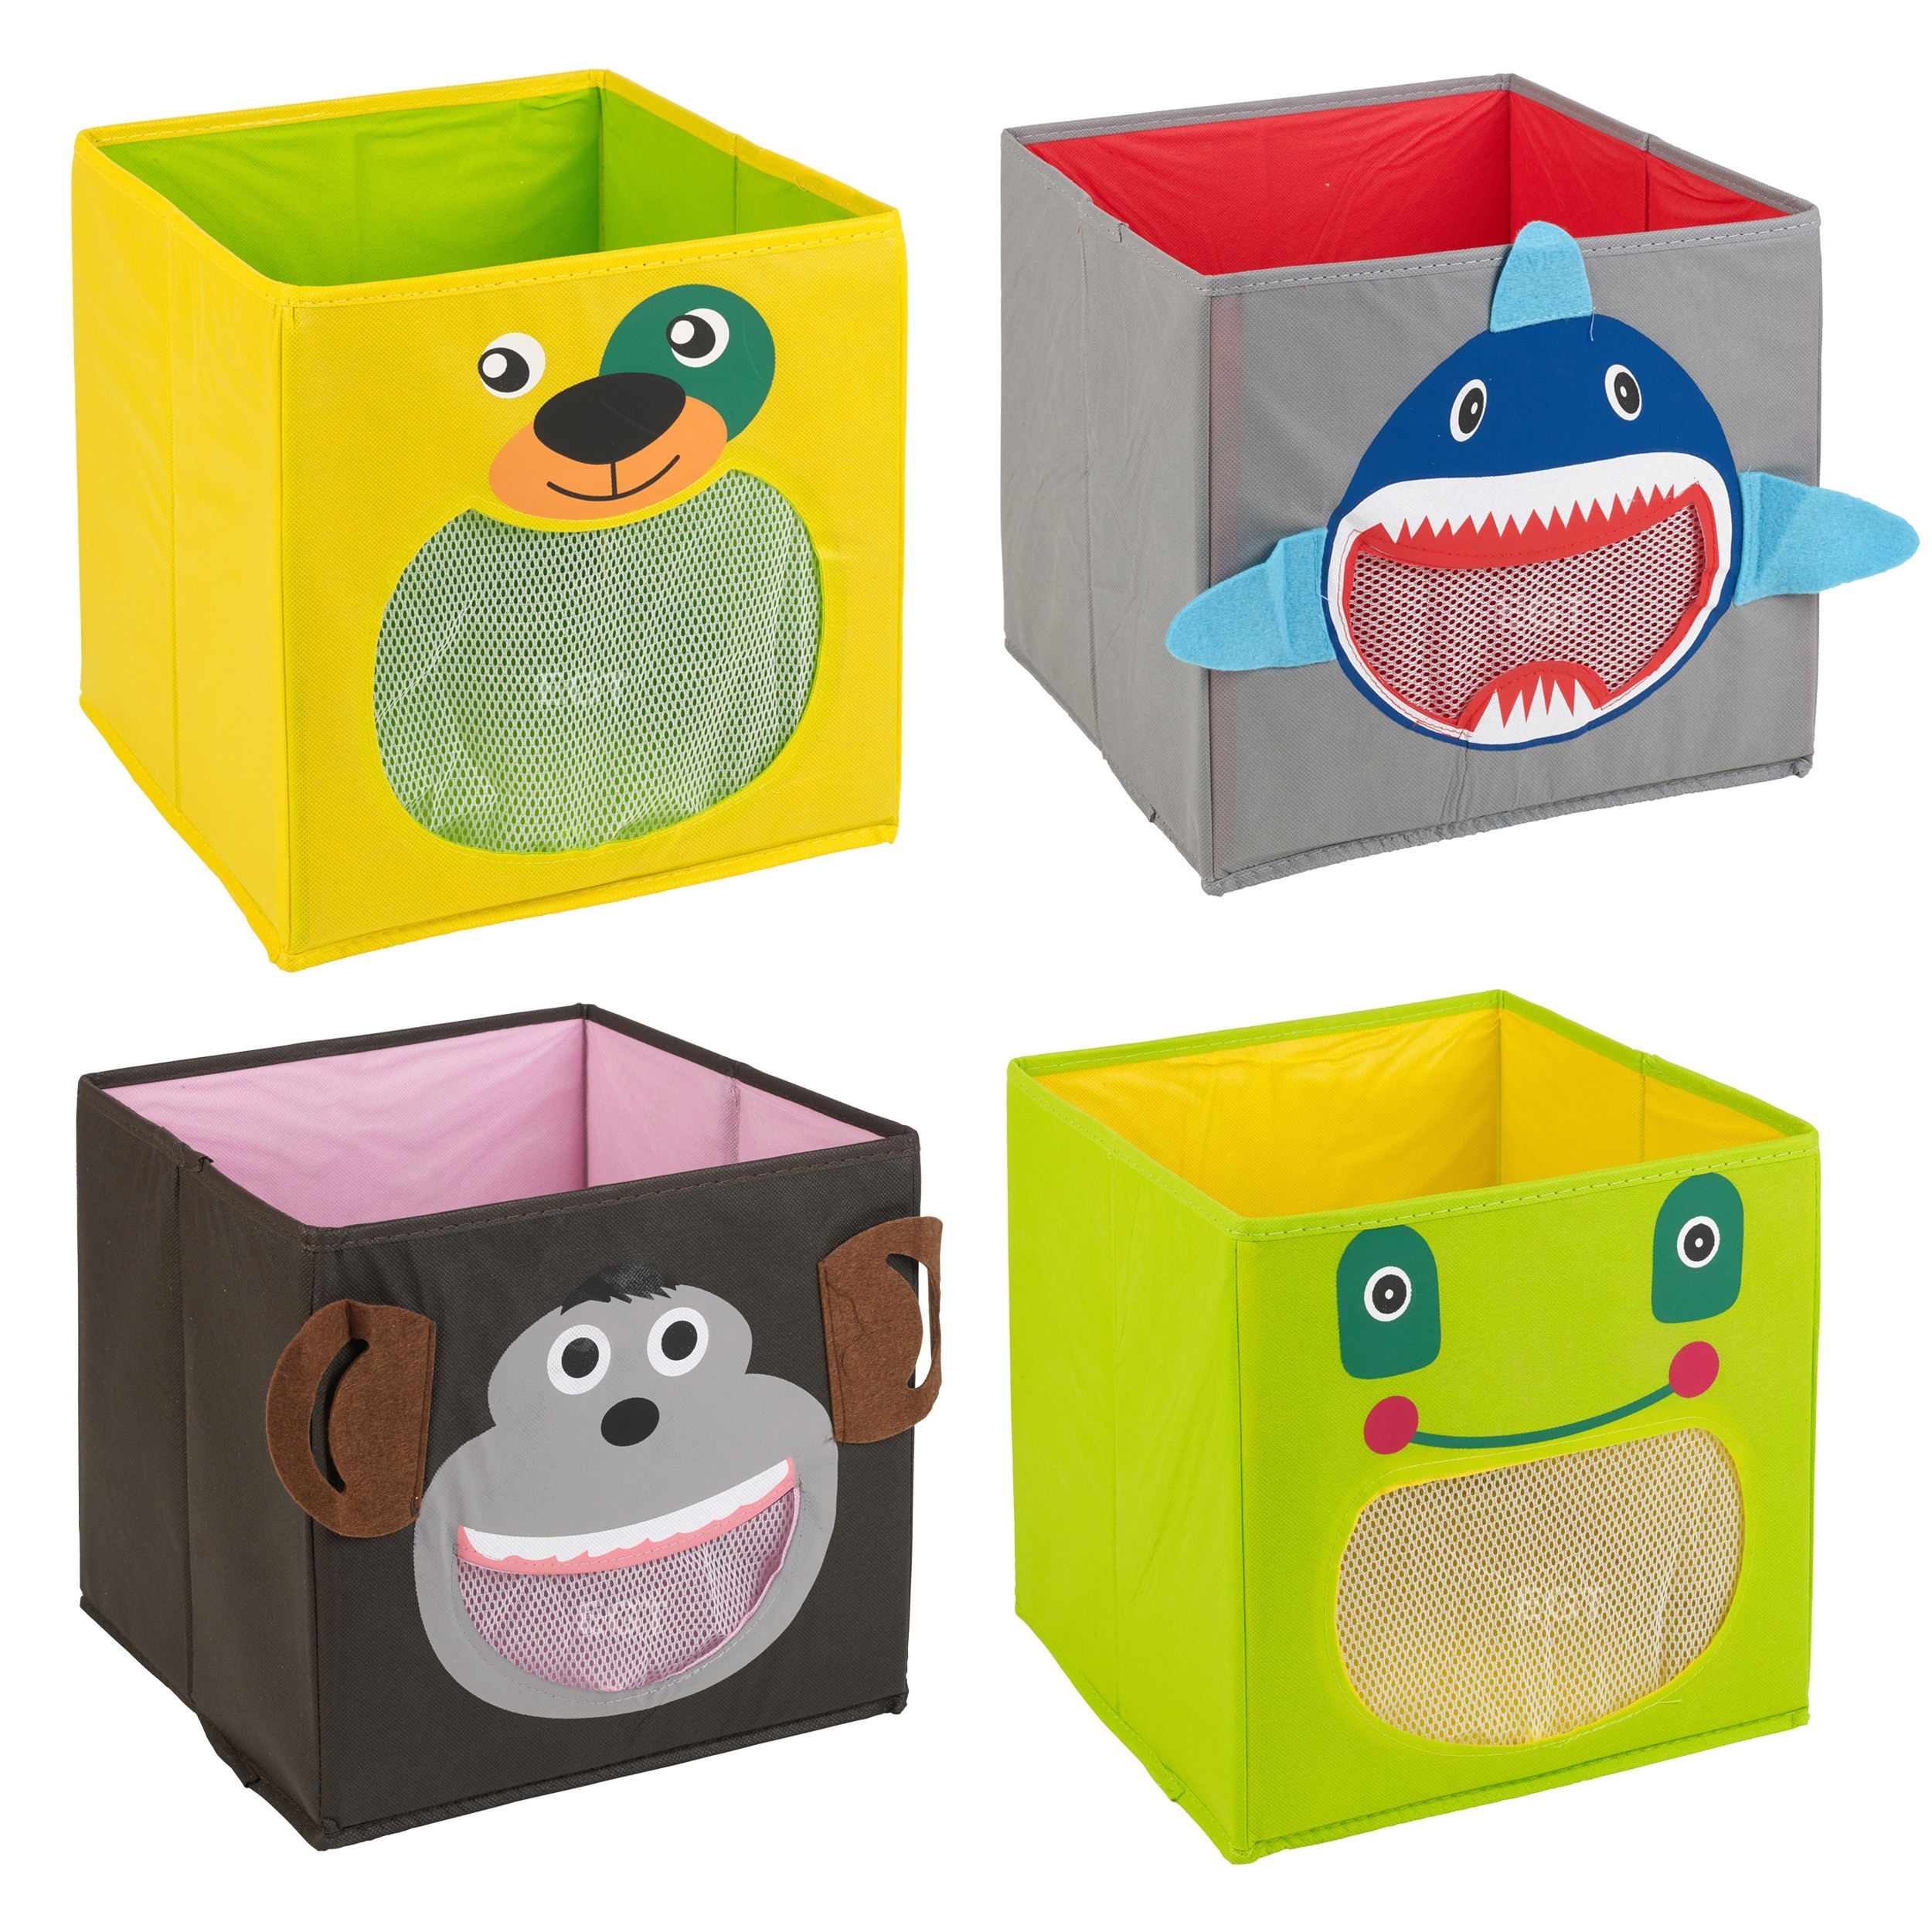 Kids Storage Boxes
 Kids Toy Storage Box Non Woven Fabric Collapsible